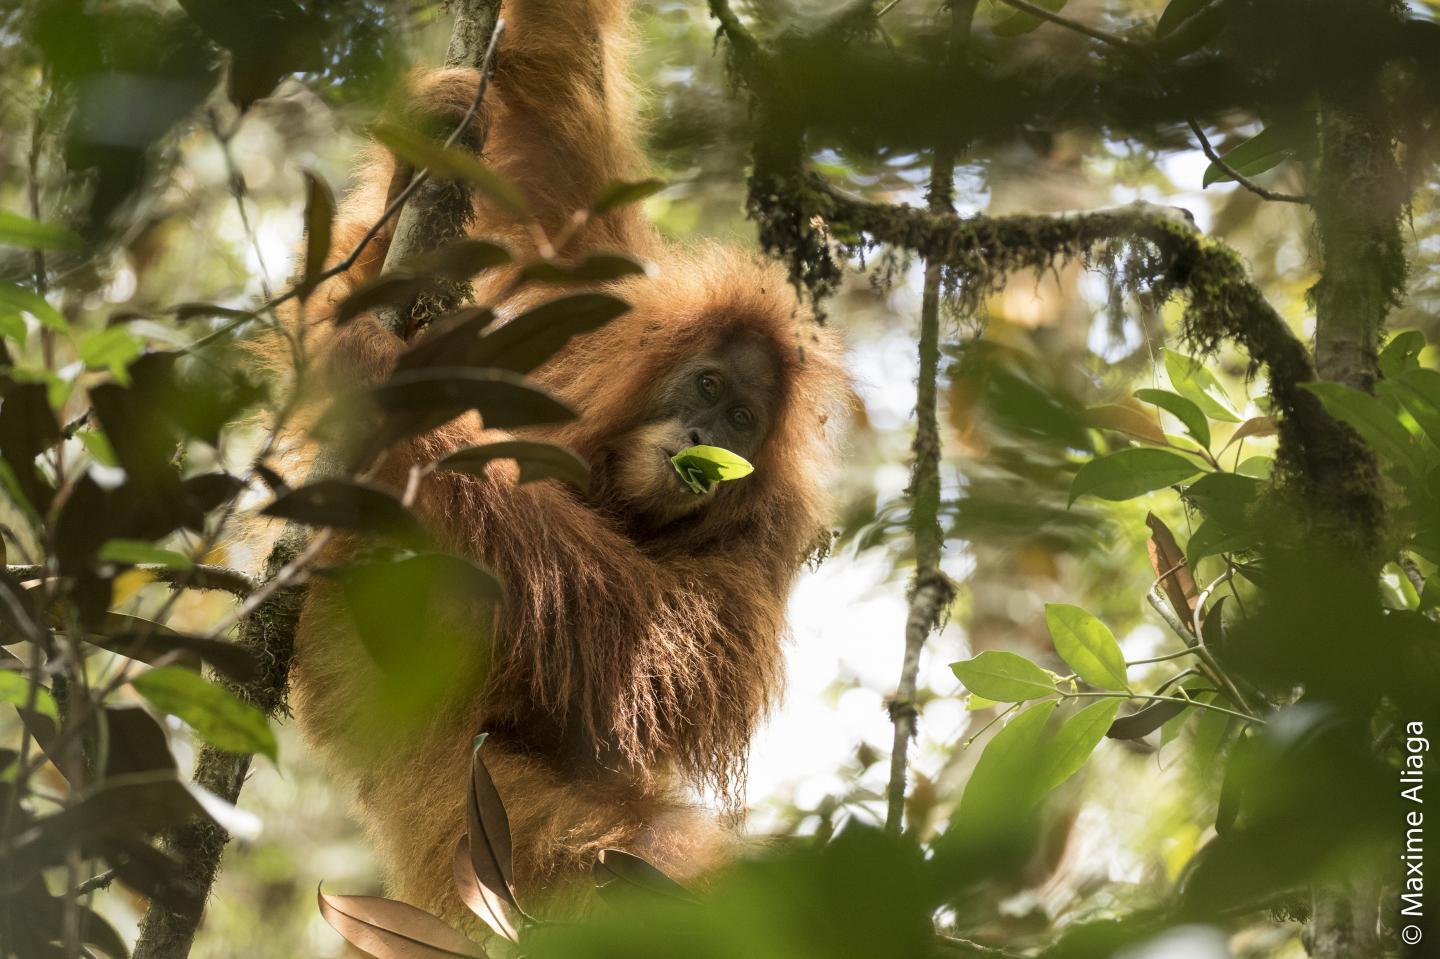 Experts estimate that there are fewer than 800 Tapanuli orangutans left in the world, making their prospects for survival unclear.